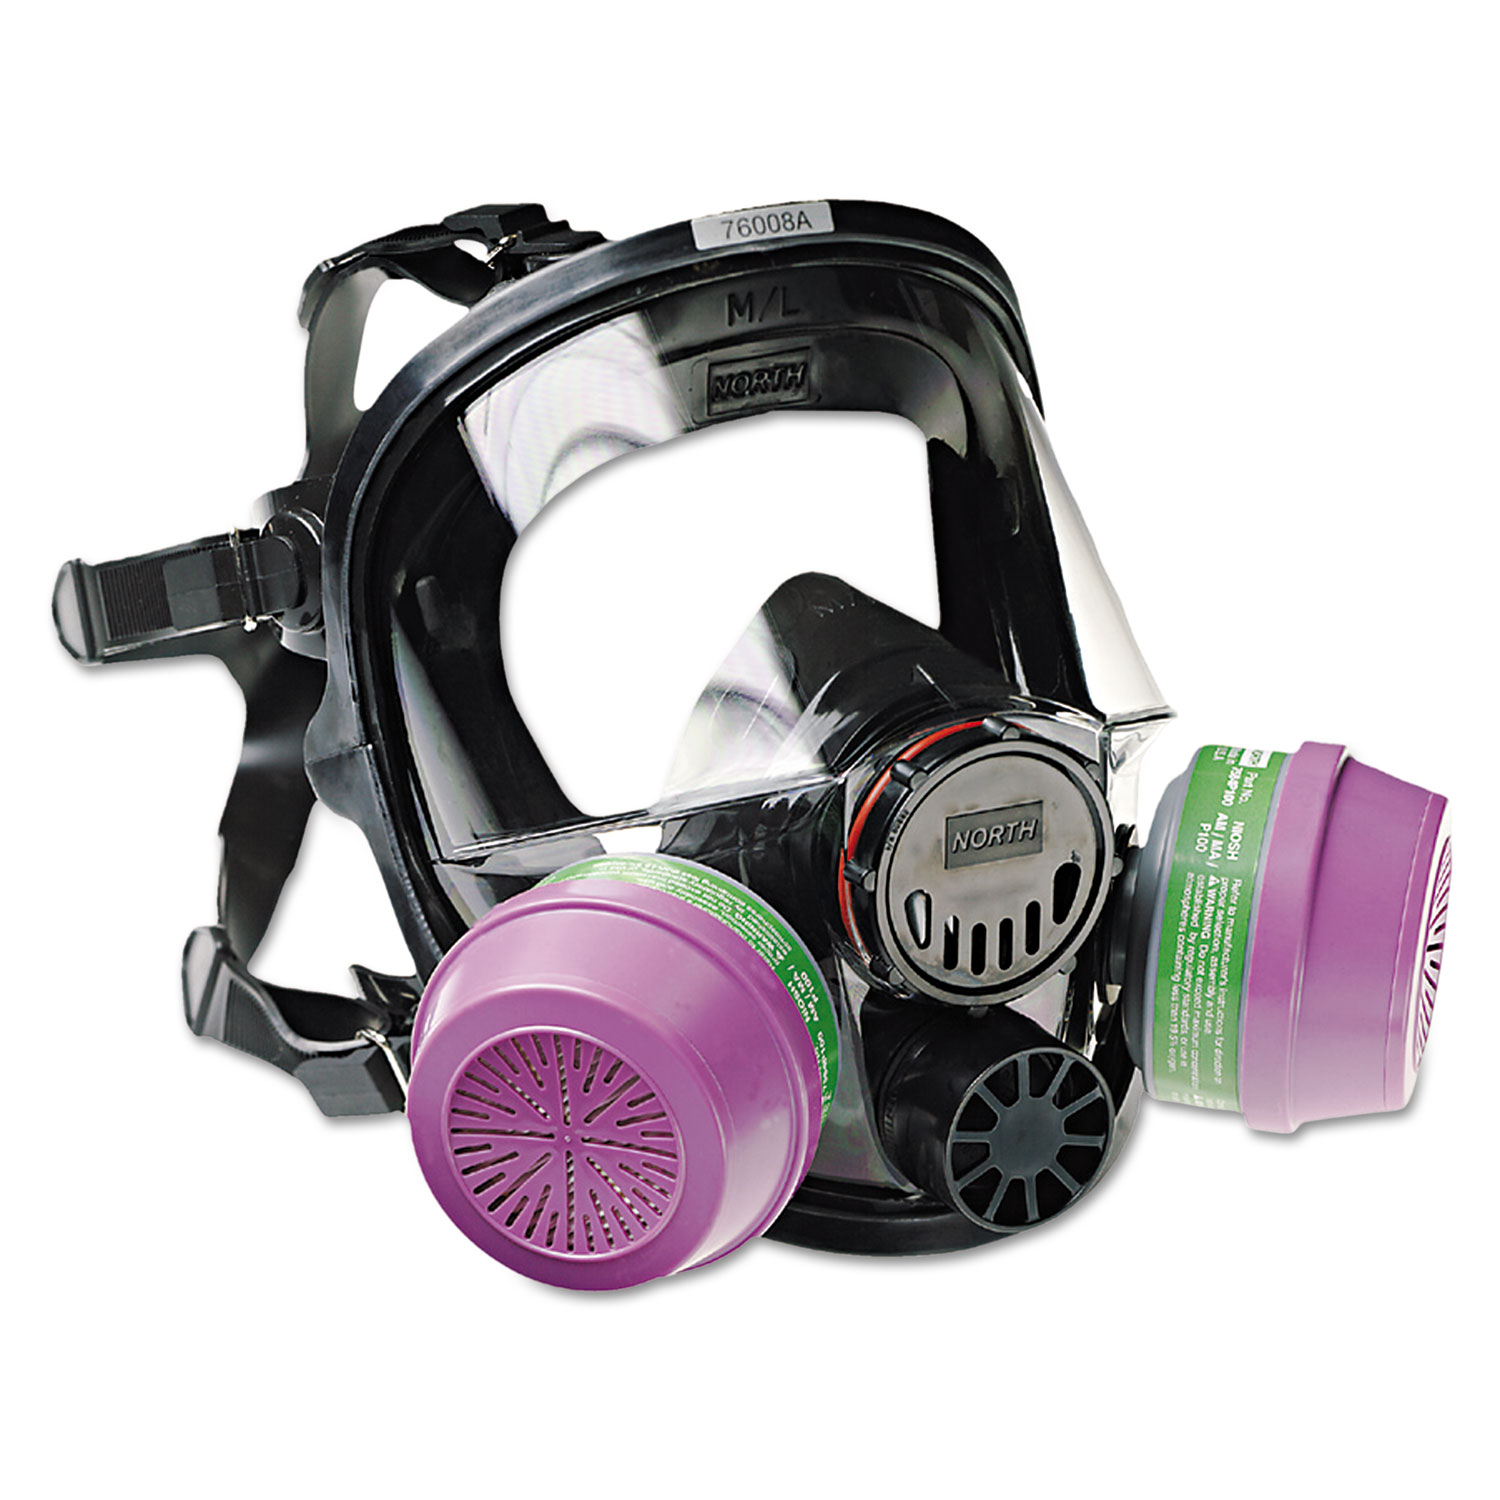  North Safety 760008A 7600 Series Full-Facepiece Respirator Mask, Medium/Large (NSP760008A) 